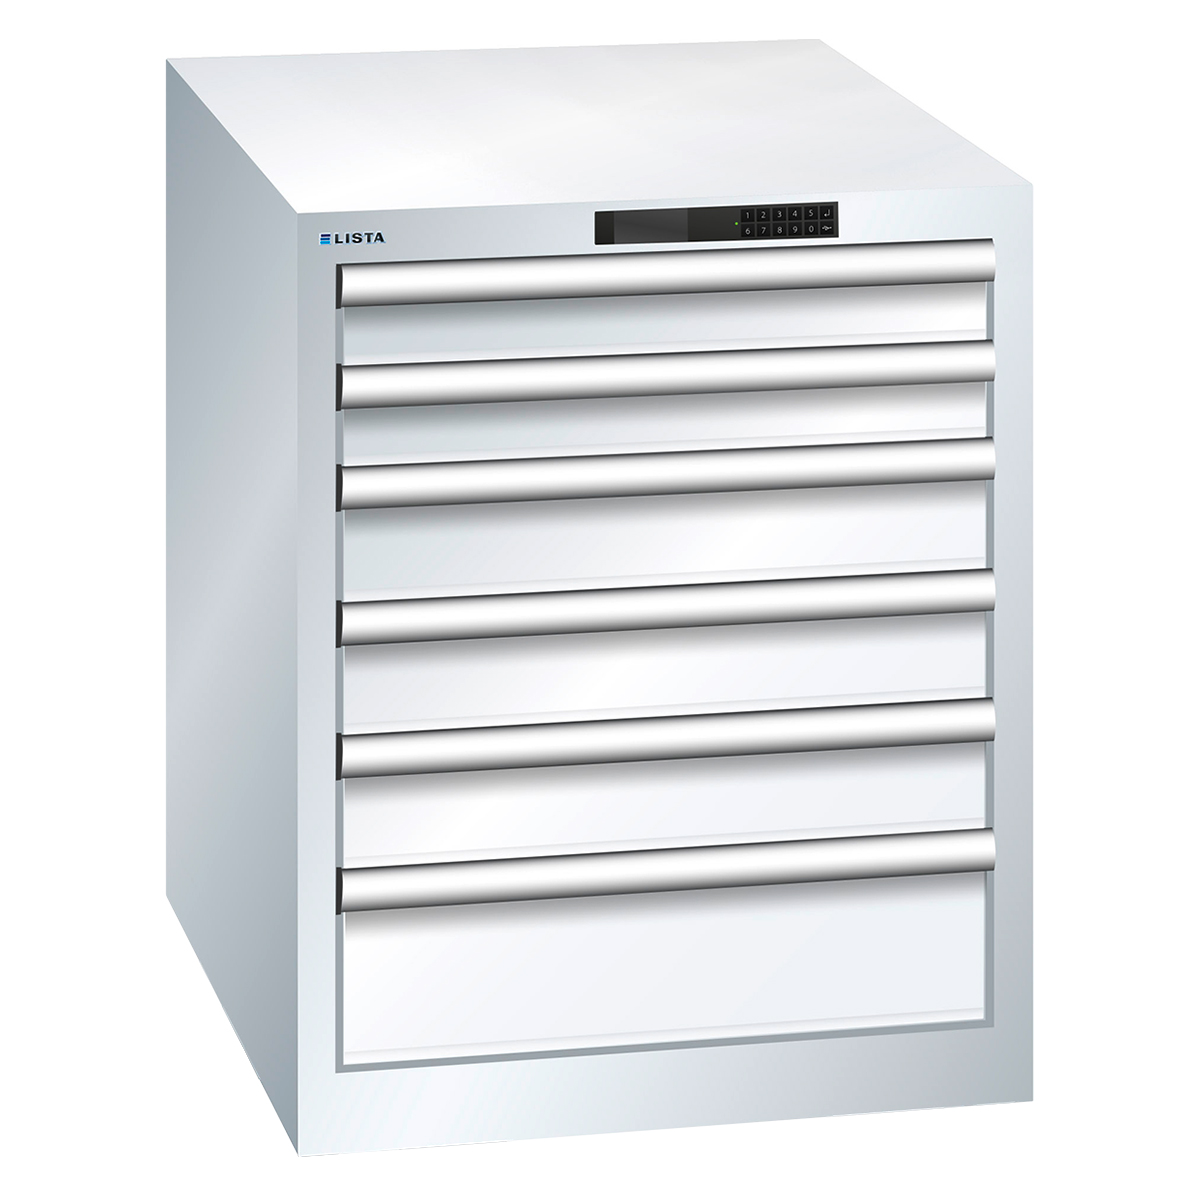 Lista drawer cabinet 27 x 27 E, 9 drawers, pure white, Key Lock, height 850 mm